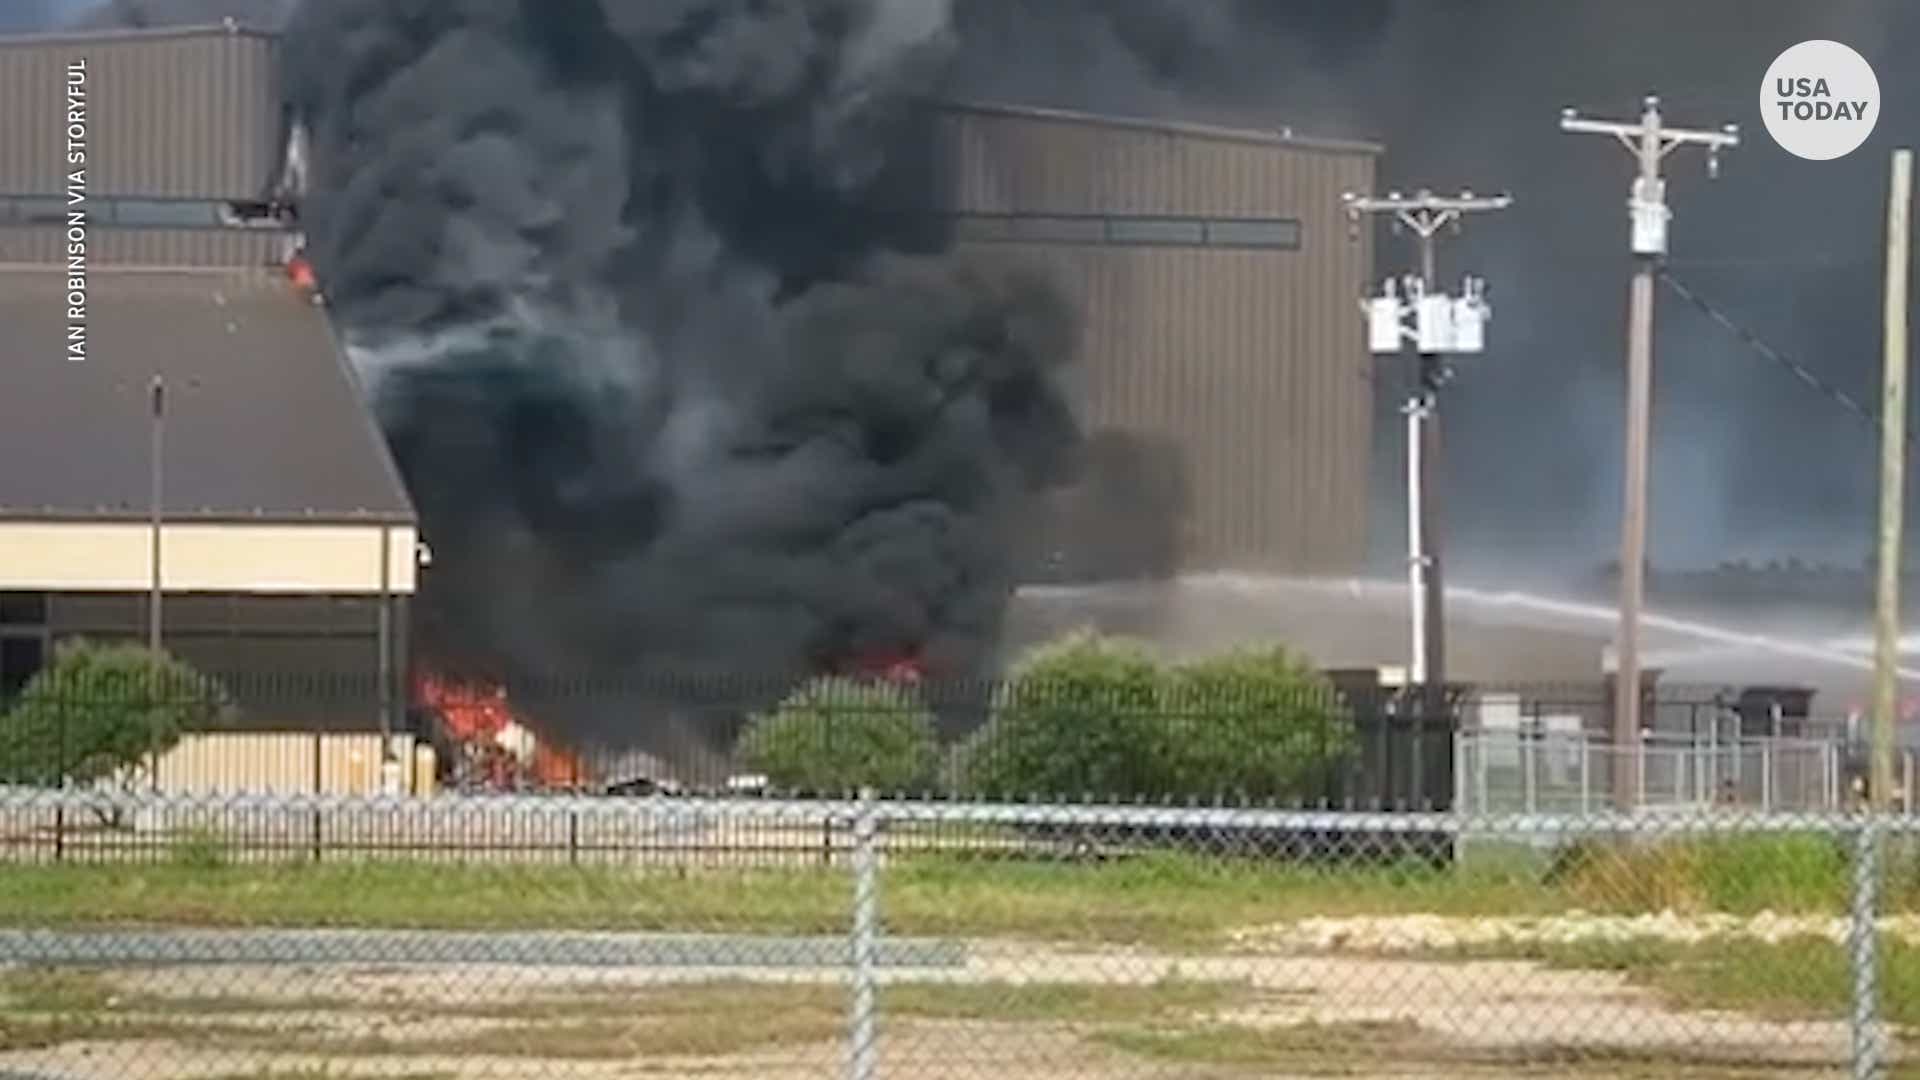 Texas Plane Crash Beechcraft Be King Air Was Sold Just Months Ago